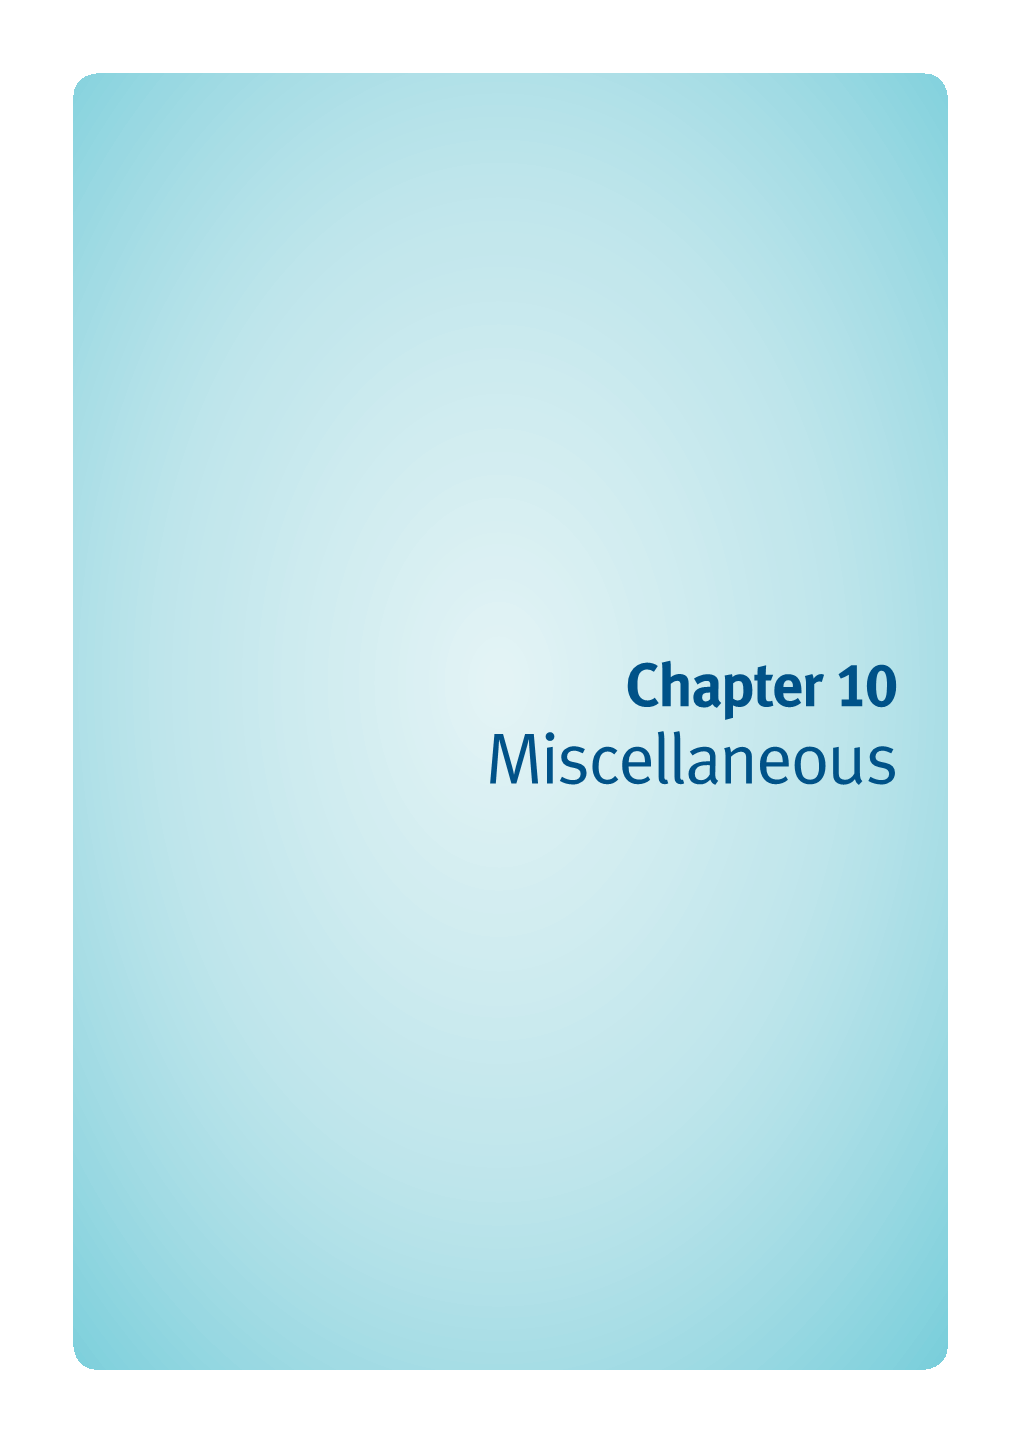 Chapter 10—Miscellaneous